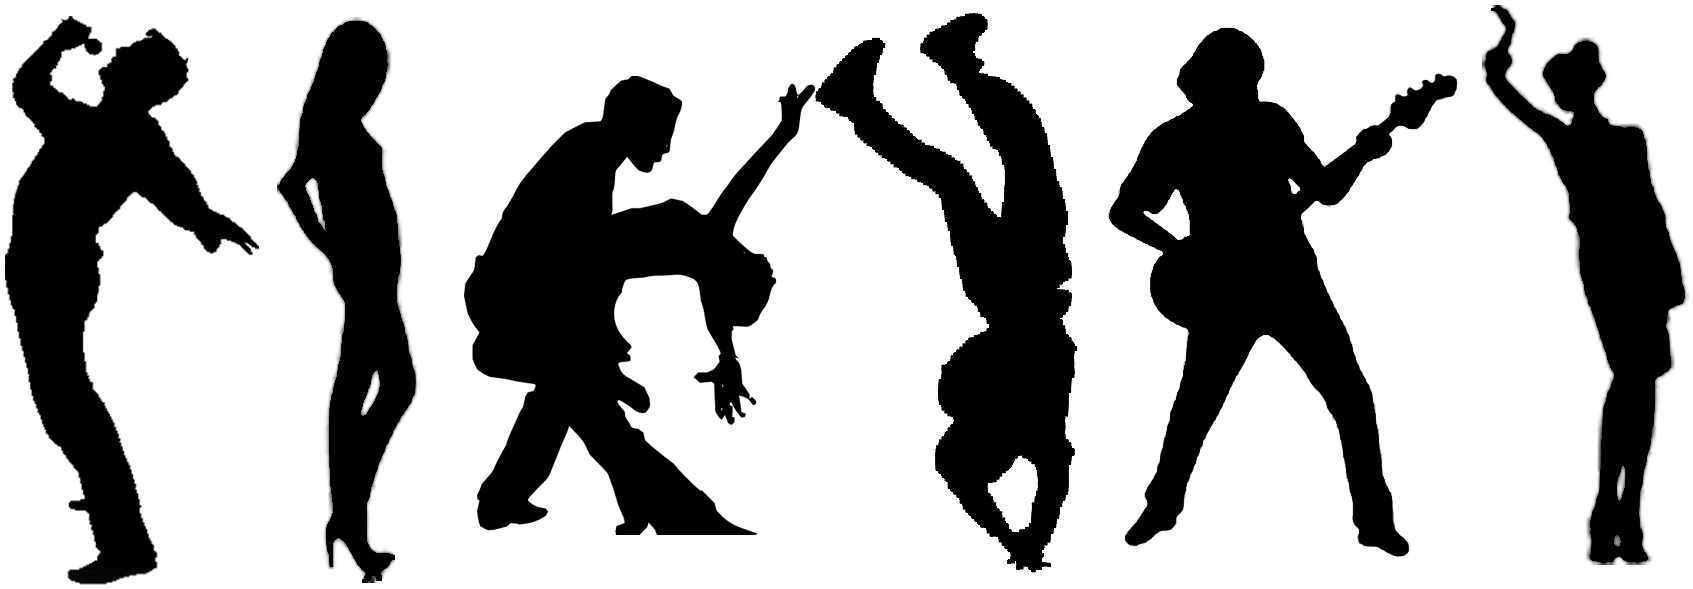 Talent Development Is Exploring Different Skills And - Talent Show Clip Art Black And White (1800x600)